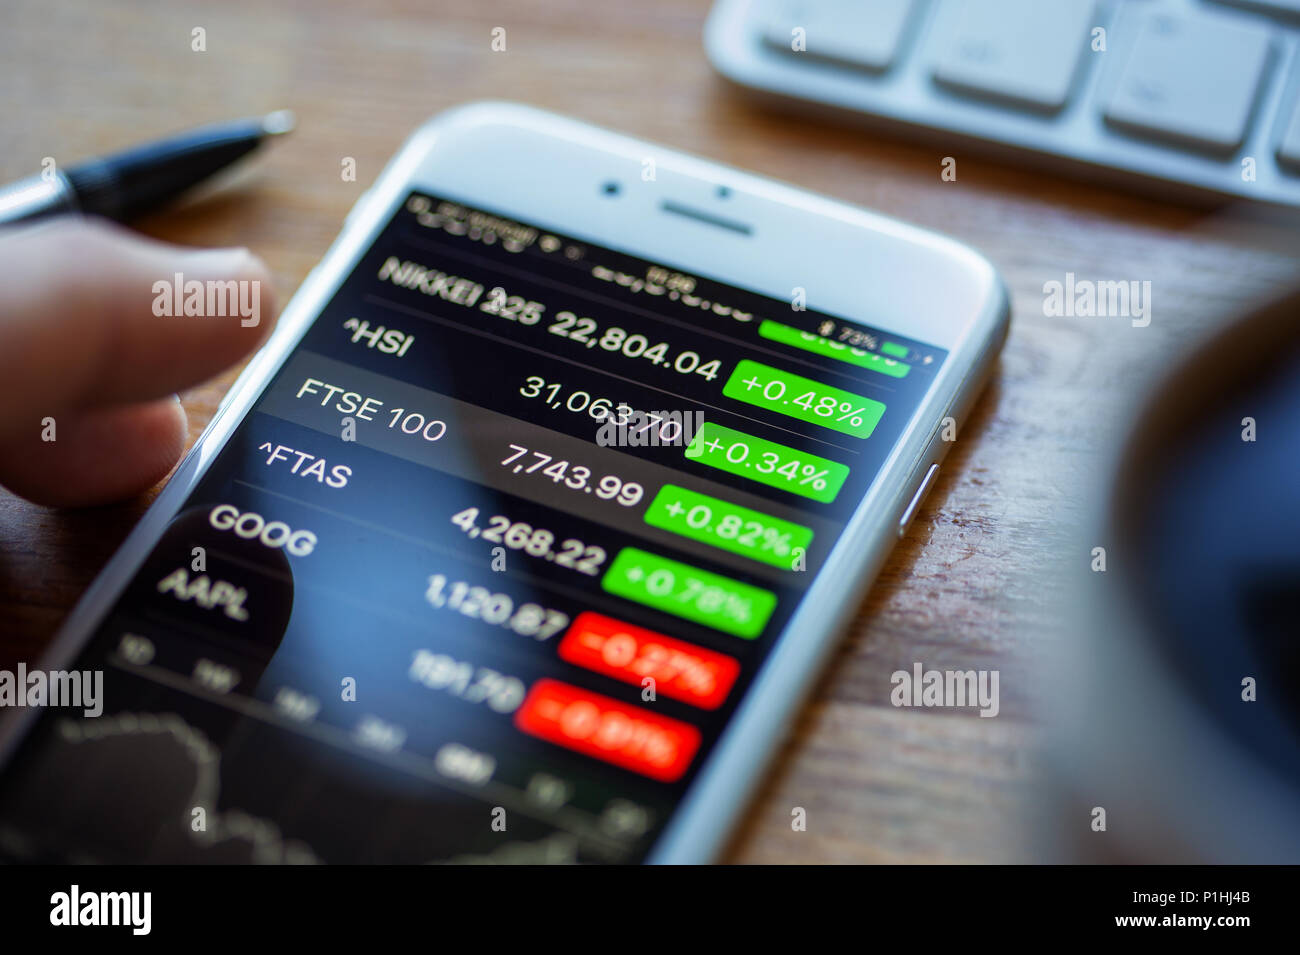 BATH, UK - JUNE 11, 2018 : An Apple iPhone 6 on a desk displaying stock market information using the Apple Stock app. A human hand hovers above the FT Stock Photo